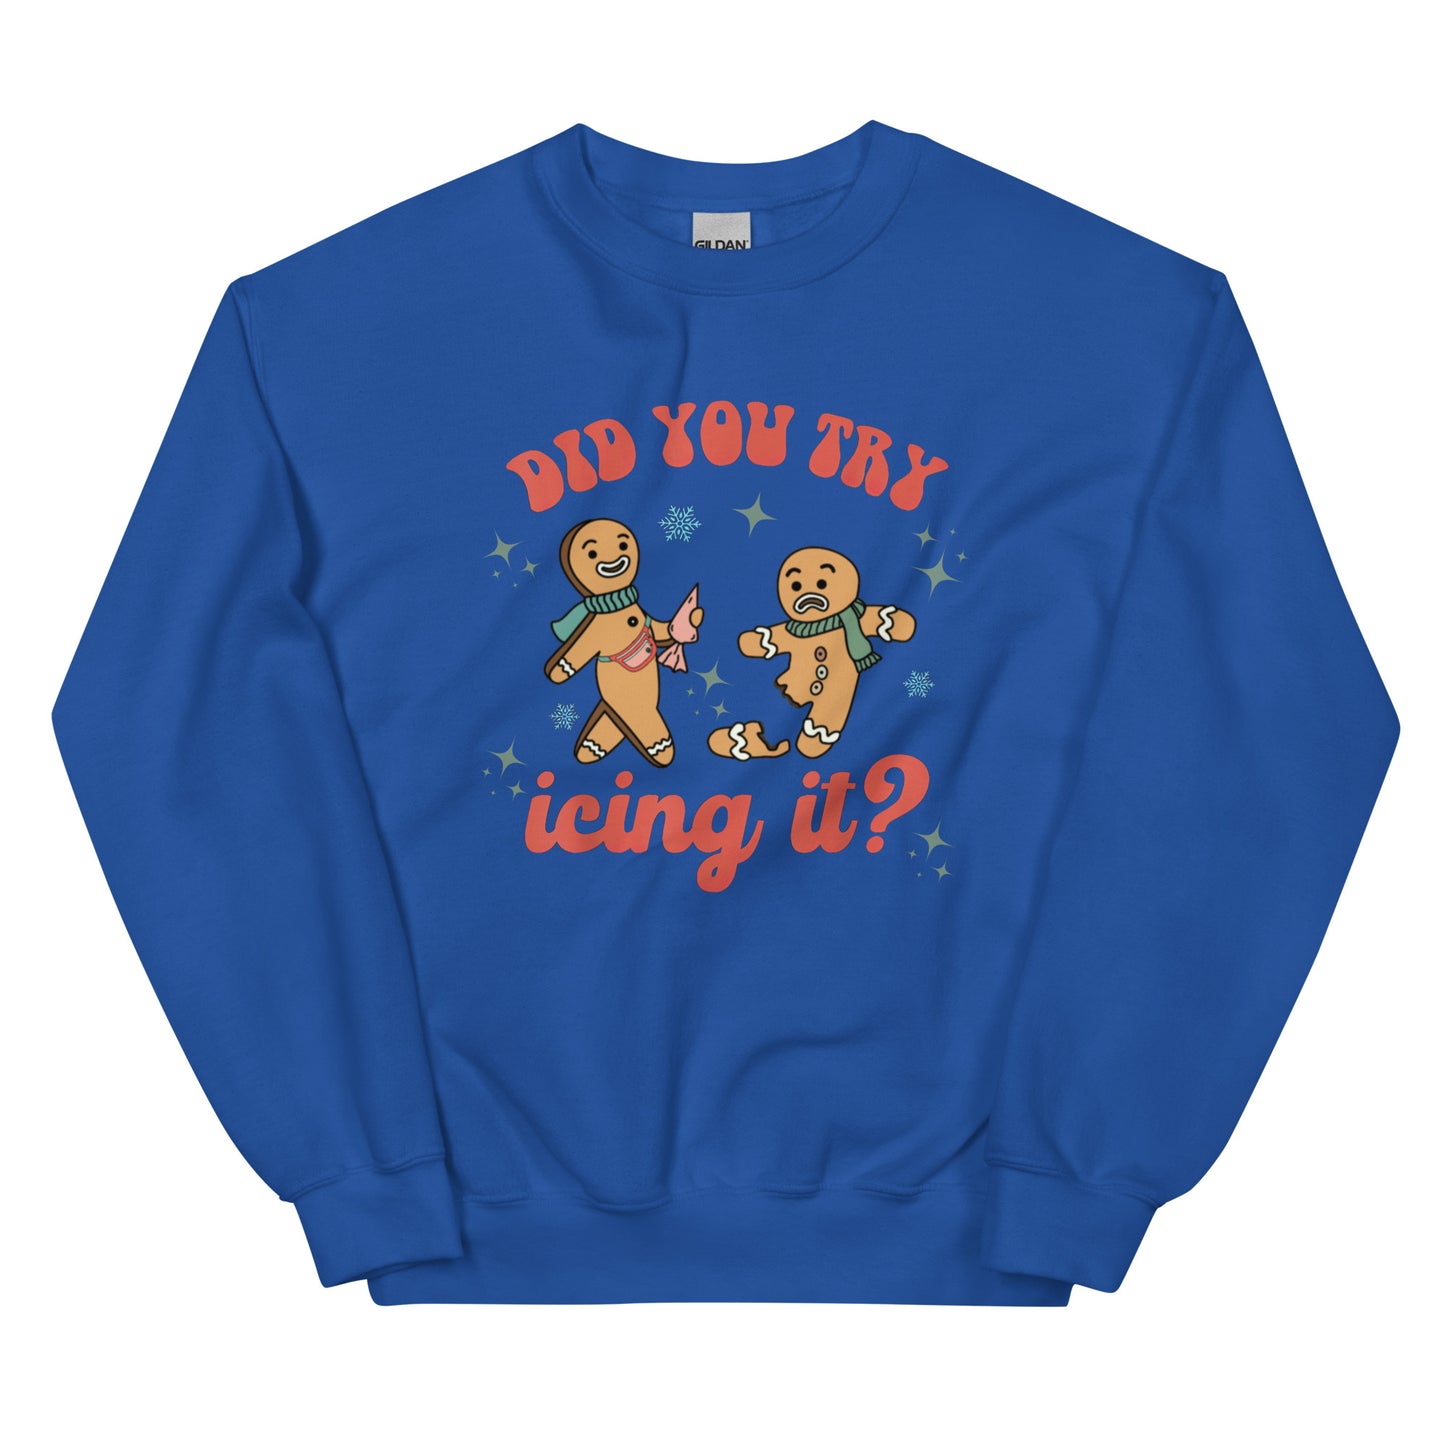 Did you try Icing it? Sweatshirt AT addition